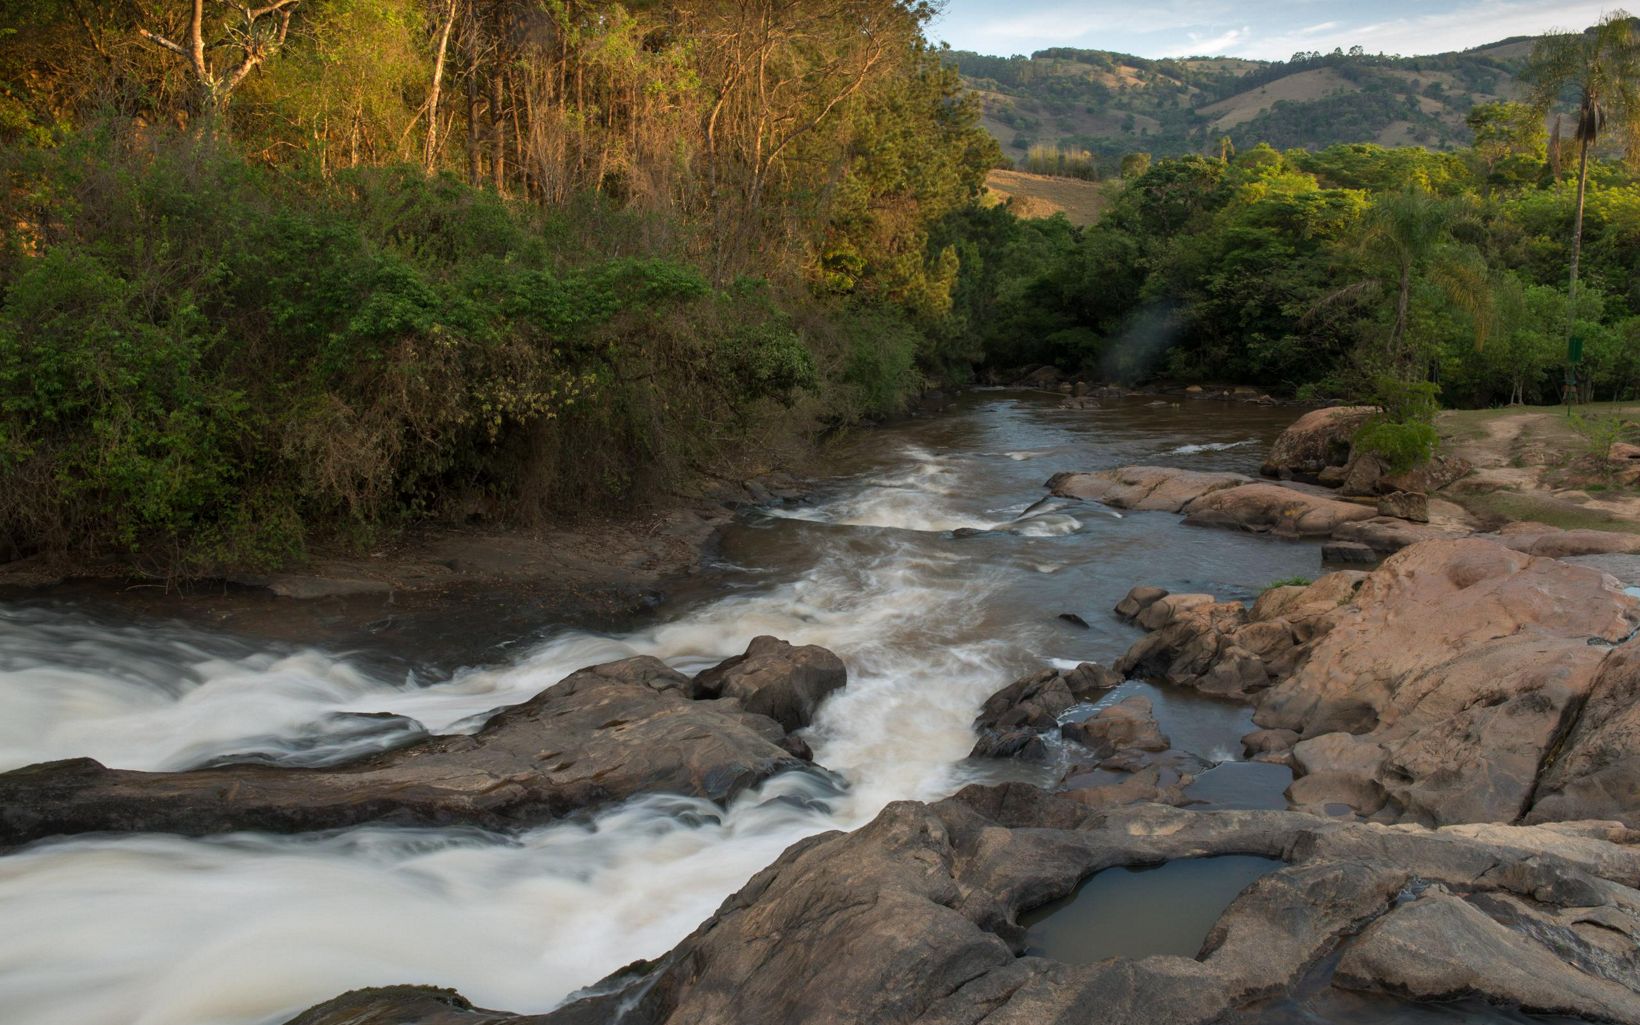 The Jaguari River's Salto Waterfall helps form the Cantareira reservoir system and provides water to more than 9 million people in greater Sao Paulo, Brazil.